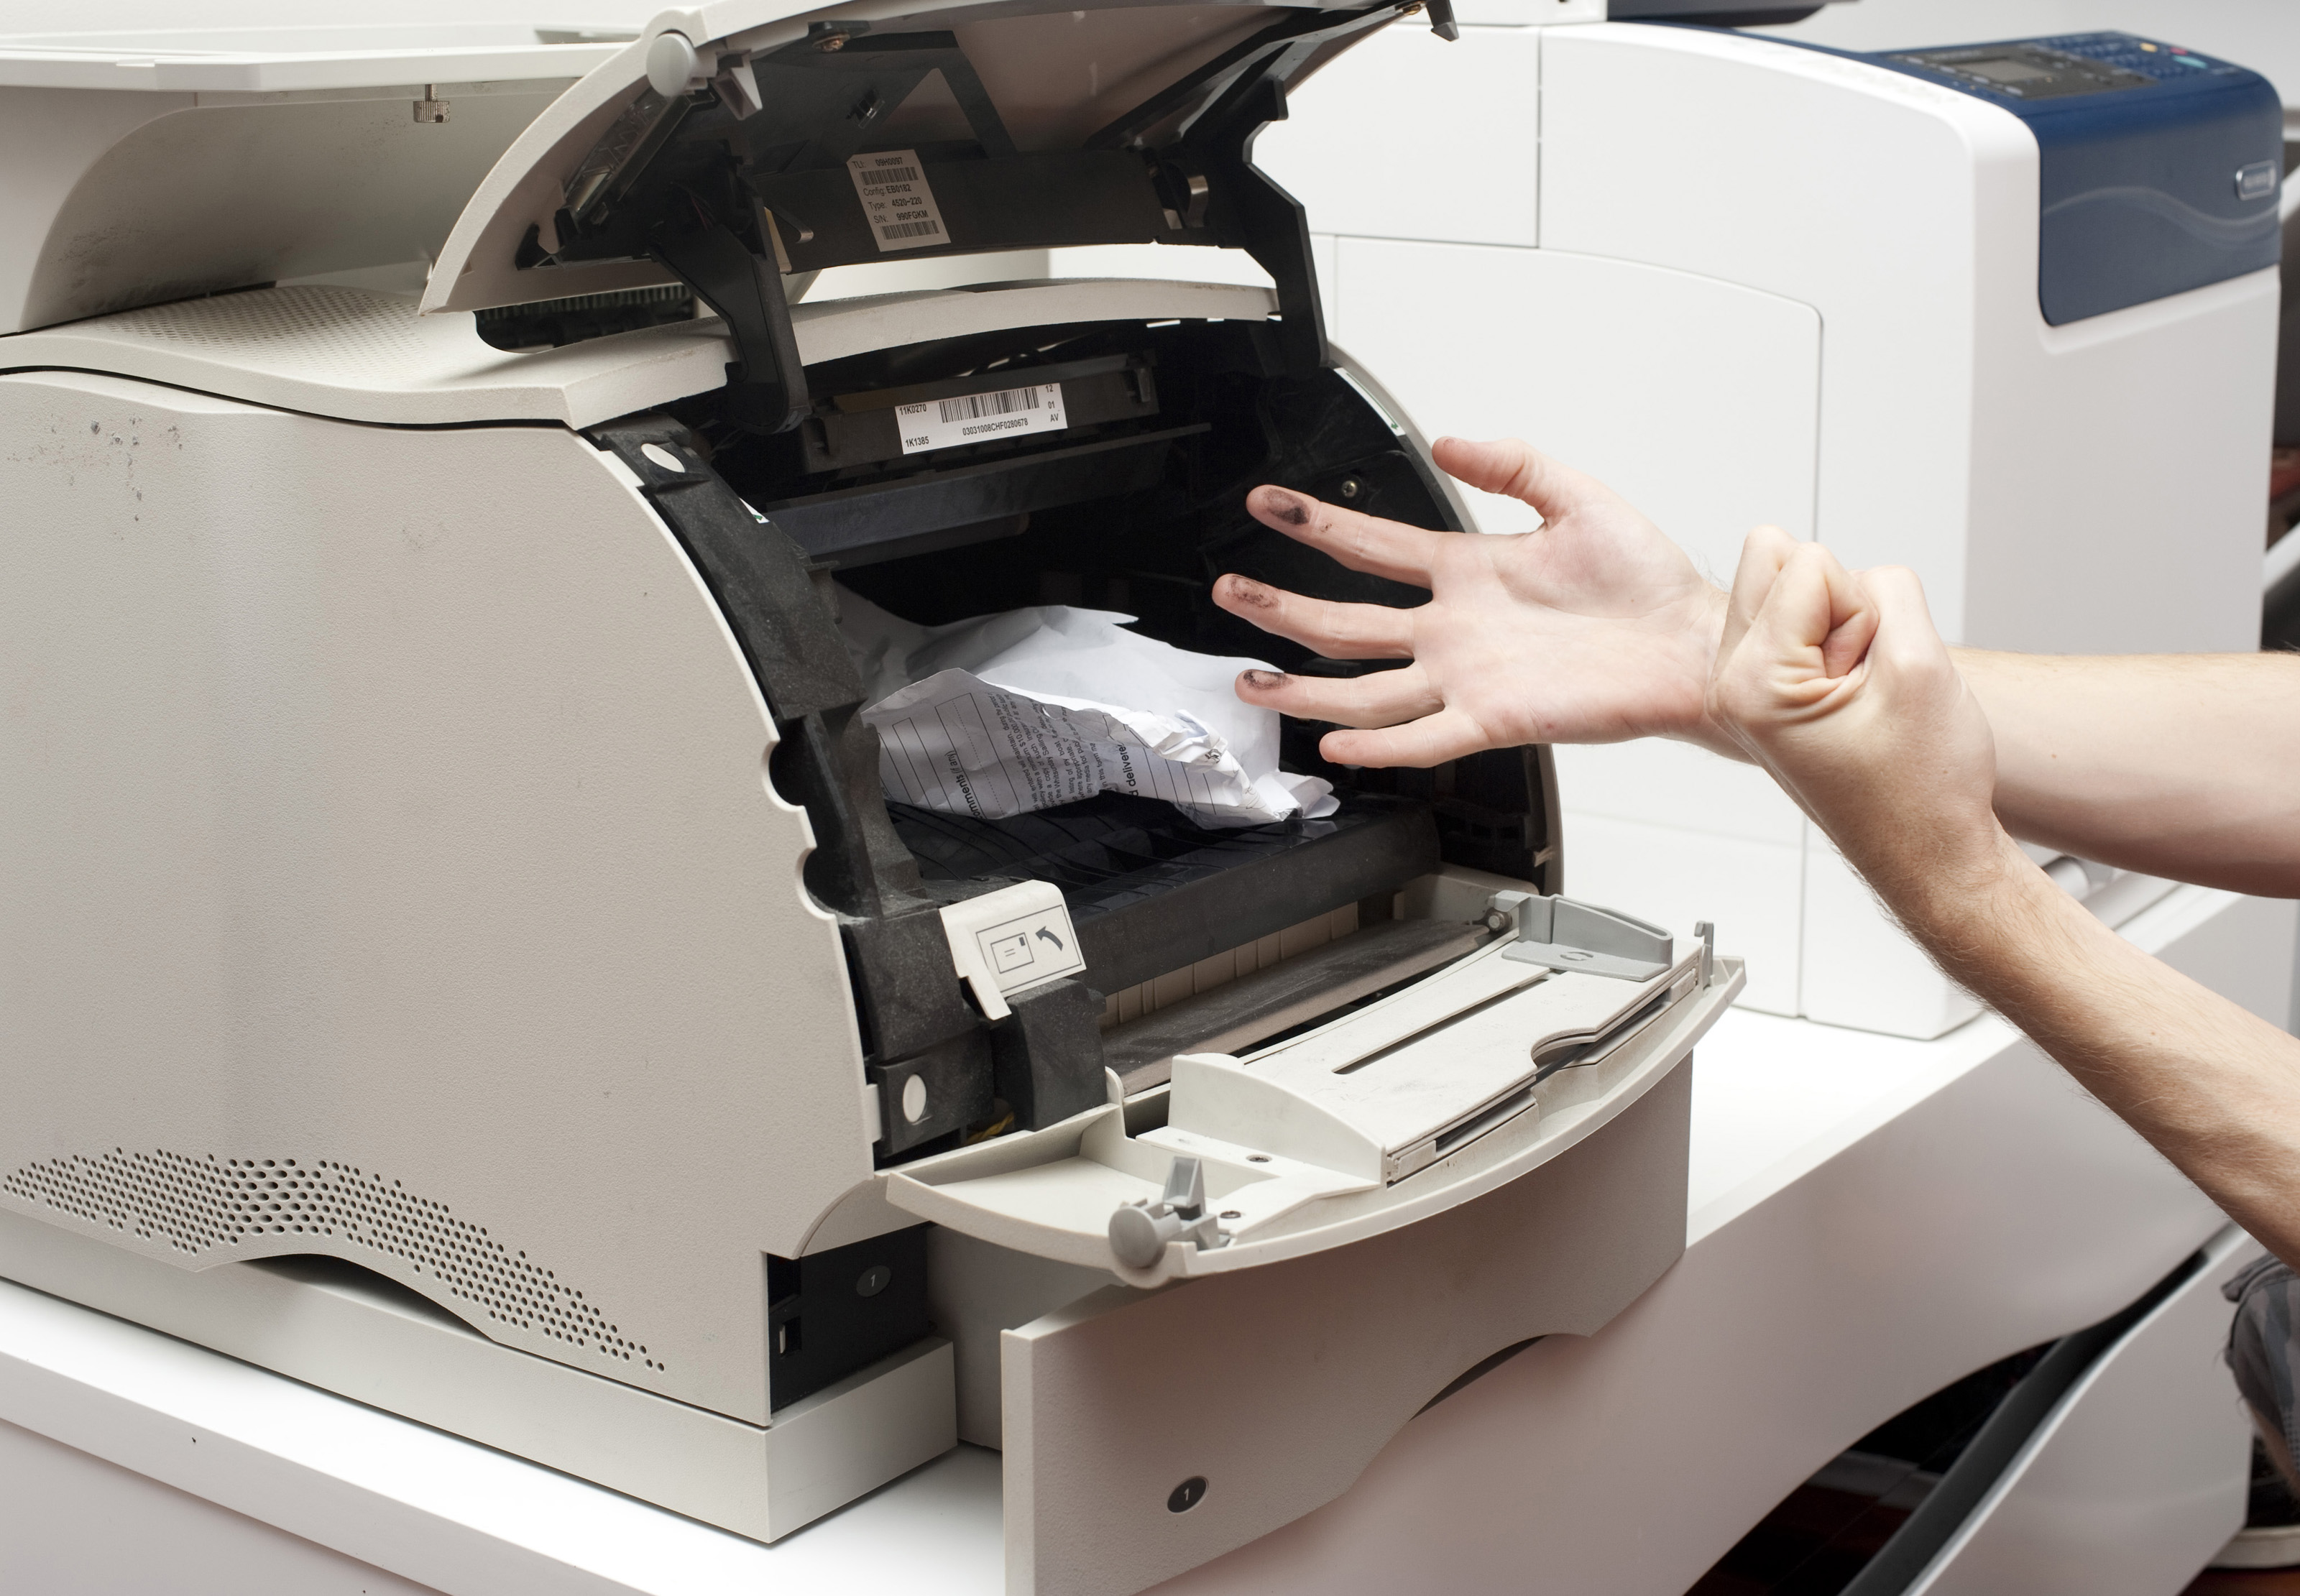 What Is Copier Paper & What Is Copier Paper Used For